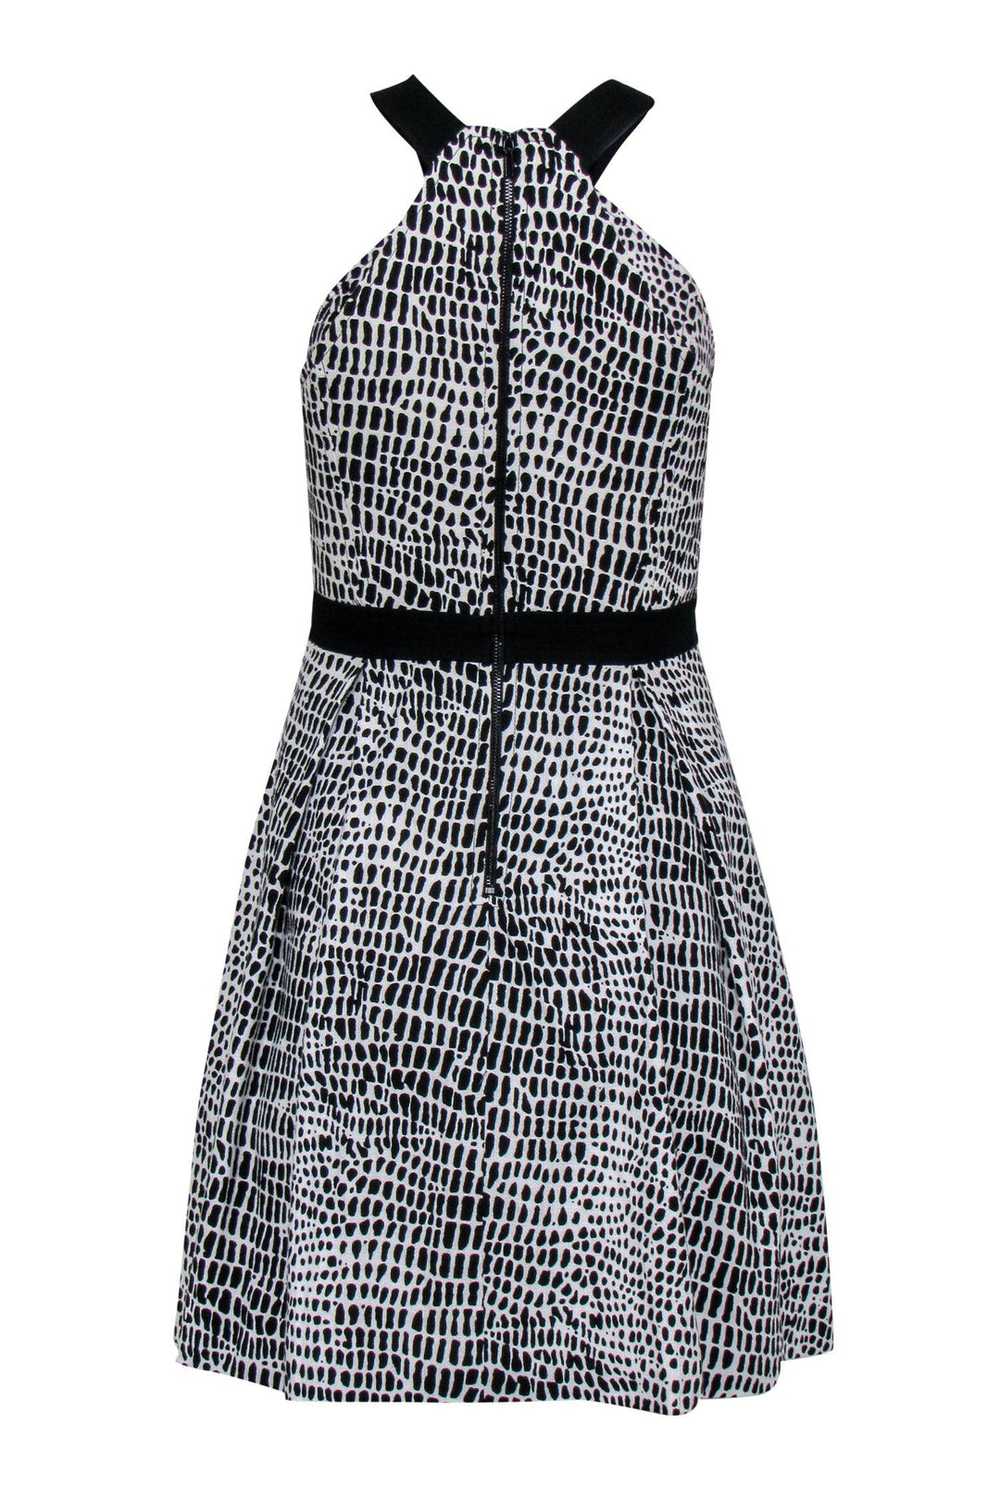 Trina Turk - Black & White Spotted Woven Cotton A… - image 3